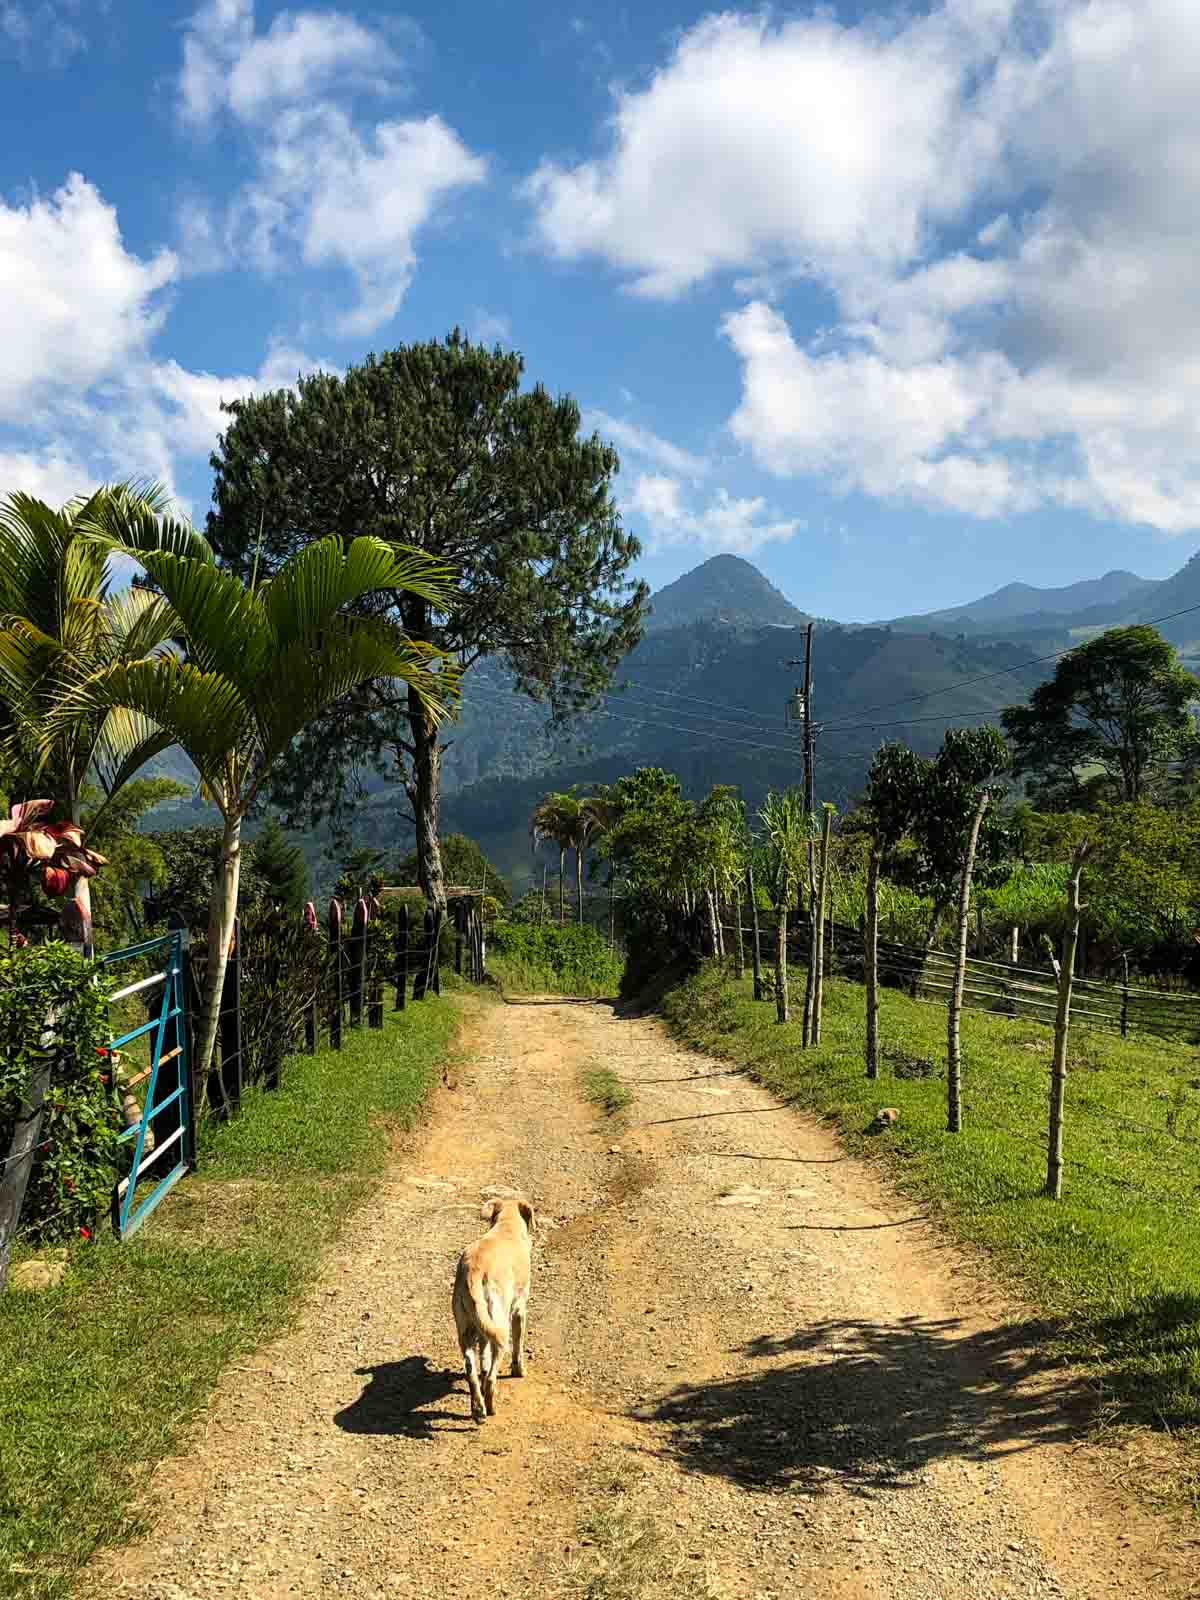 A dog in Jardin, Colombia.